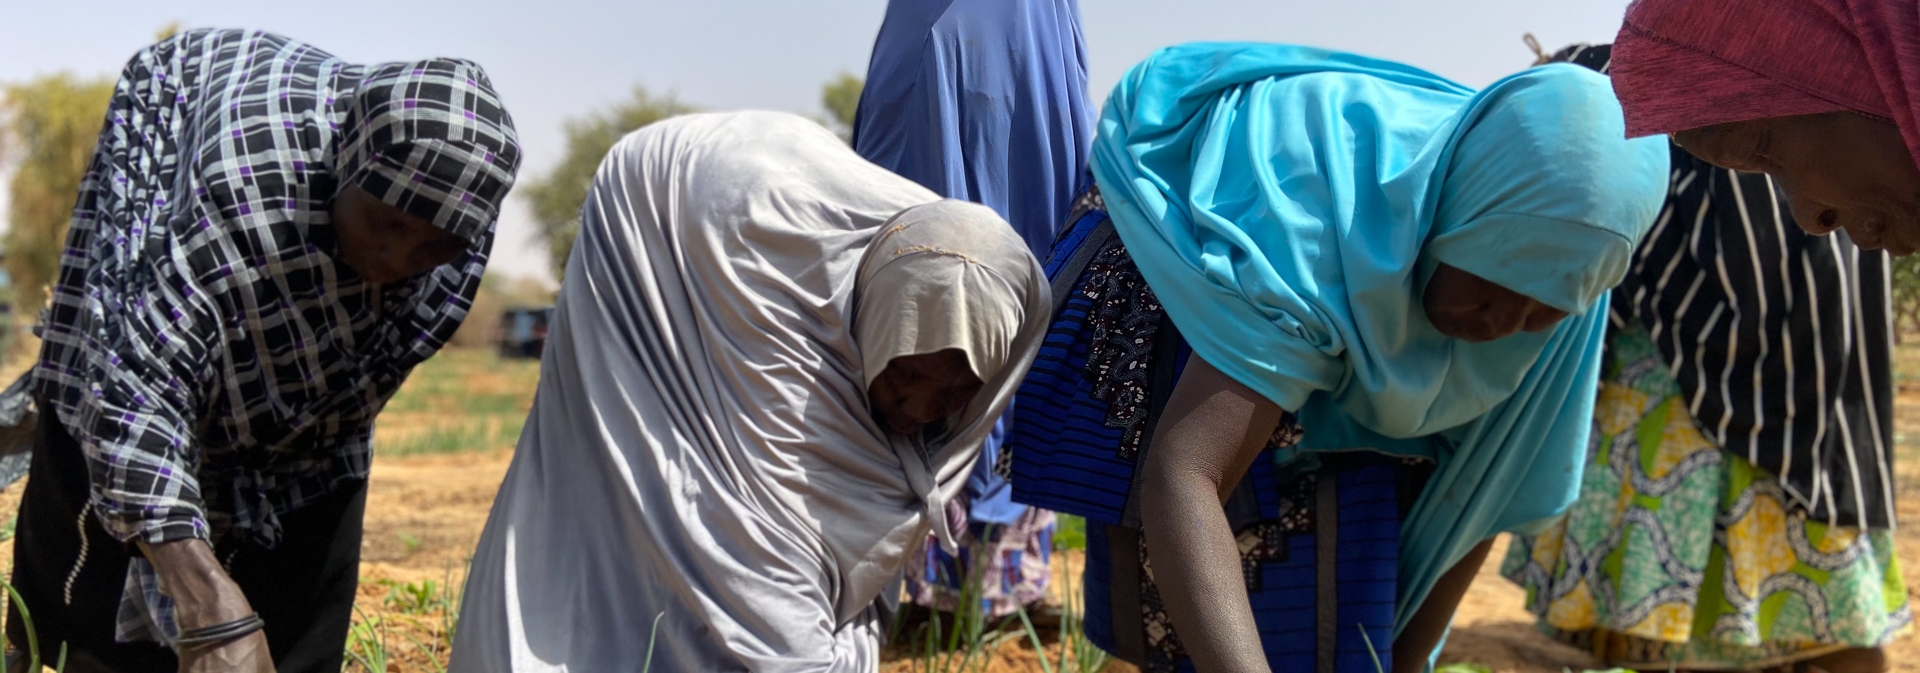 IOM Niger supporting women-led agricultural opportunities in Ouallam, Niger. Safa Msehli, 2022.